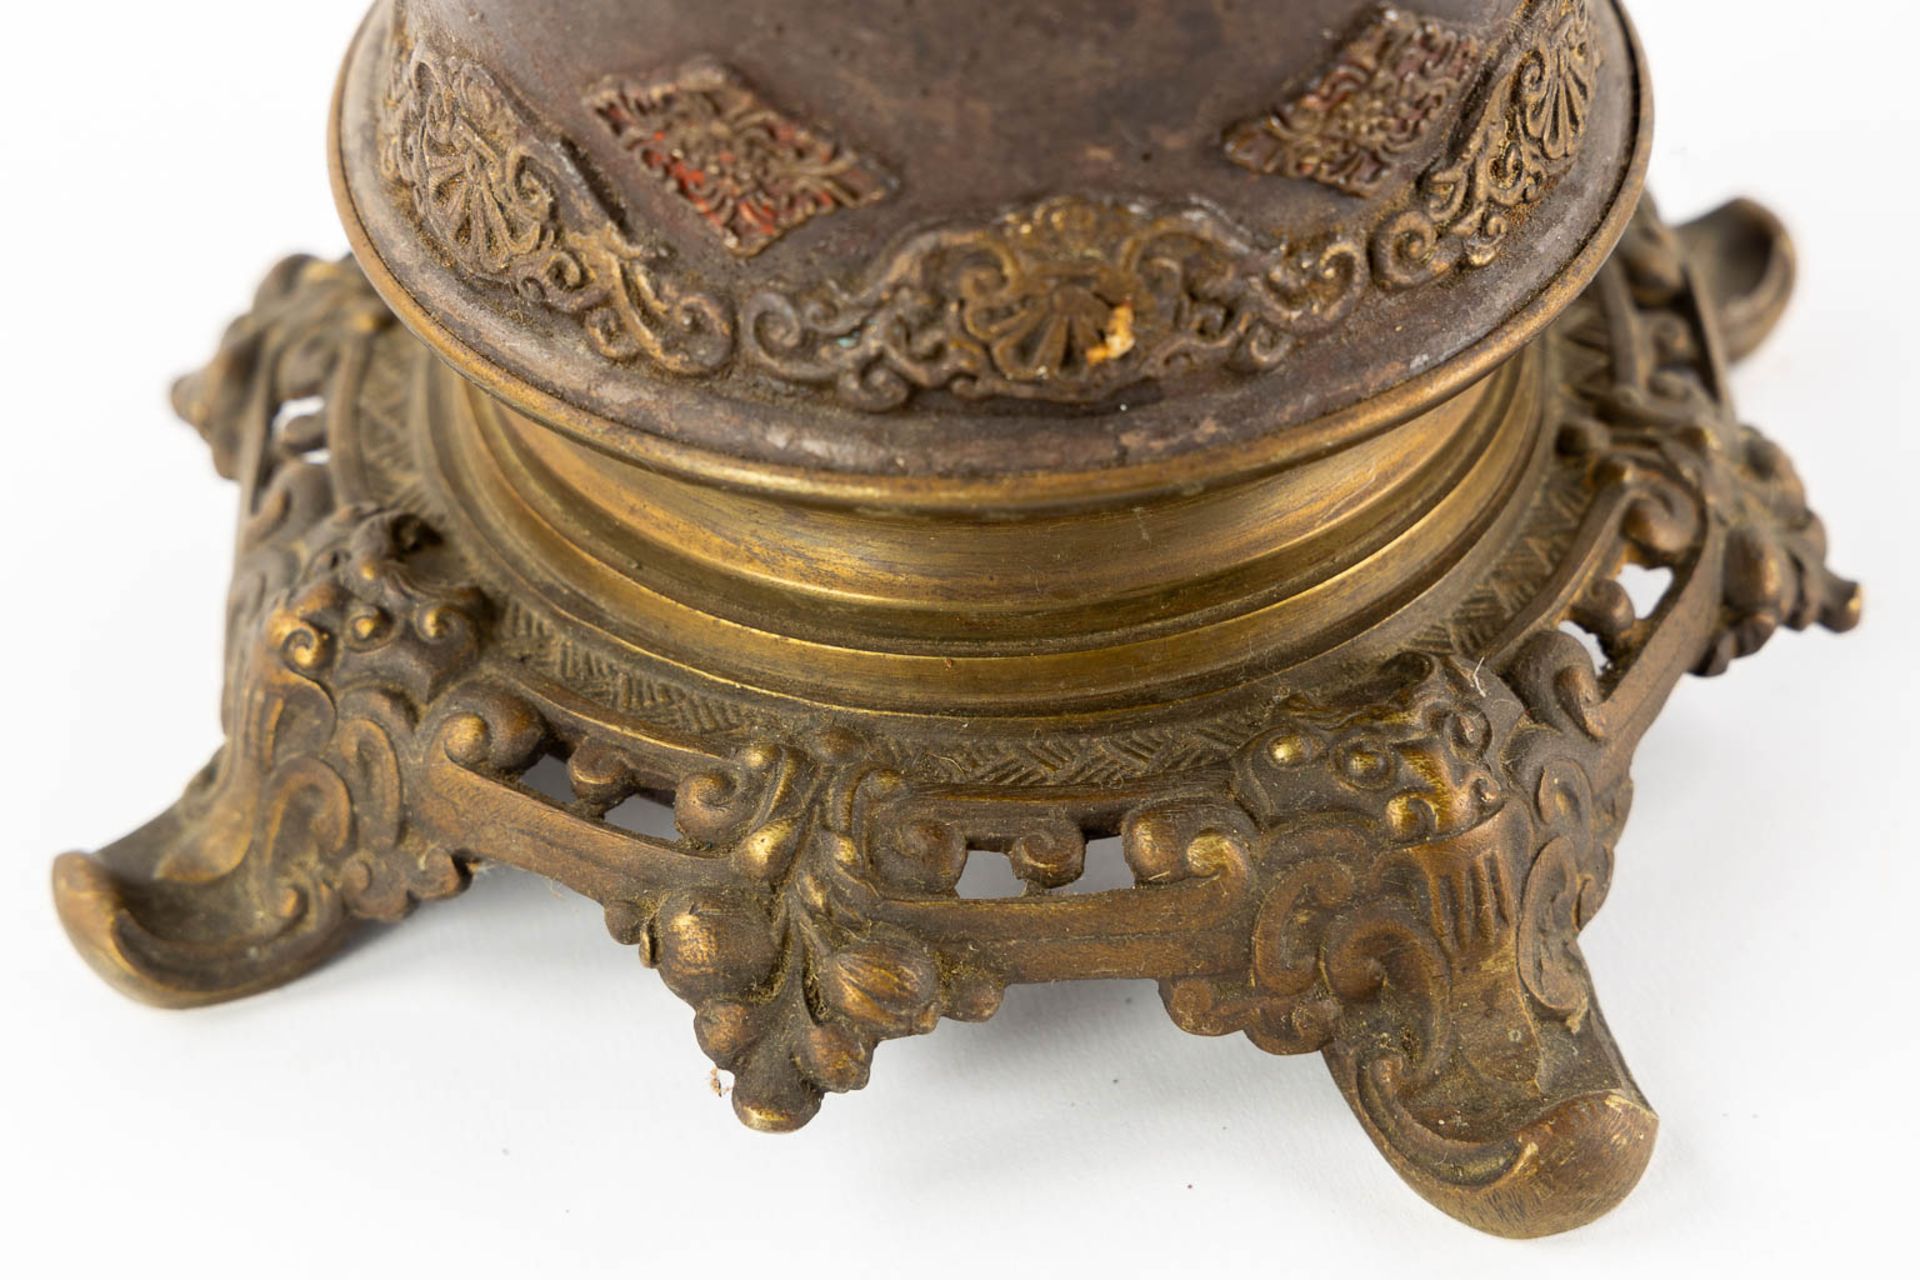 An Oriental pair of oil lamps, terracotta mounted with bronze. Circa 1900. (H:66 x D:18 cm) - Image 14 of 17